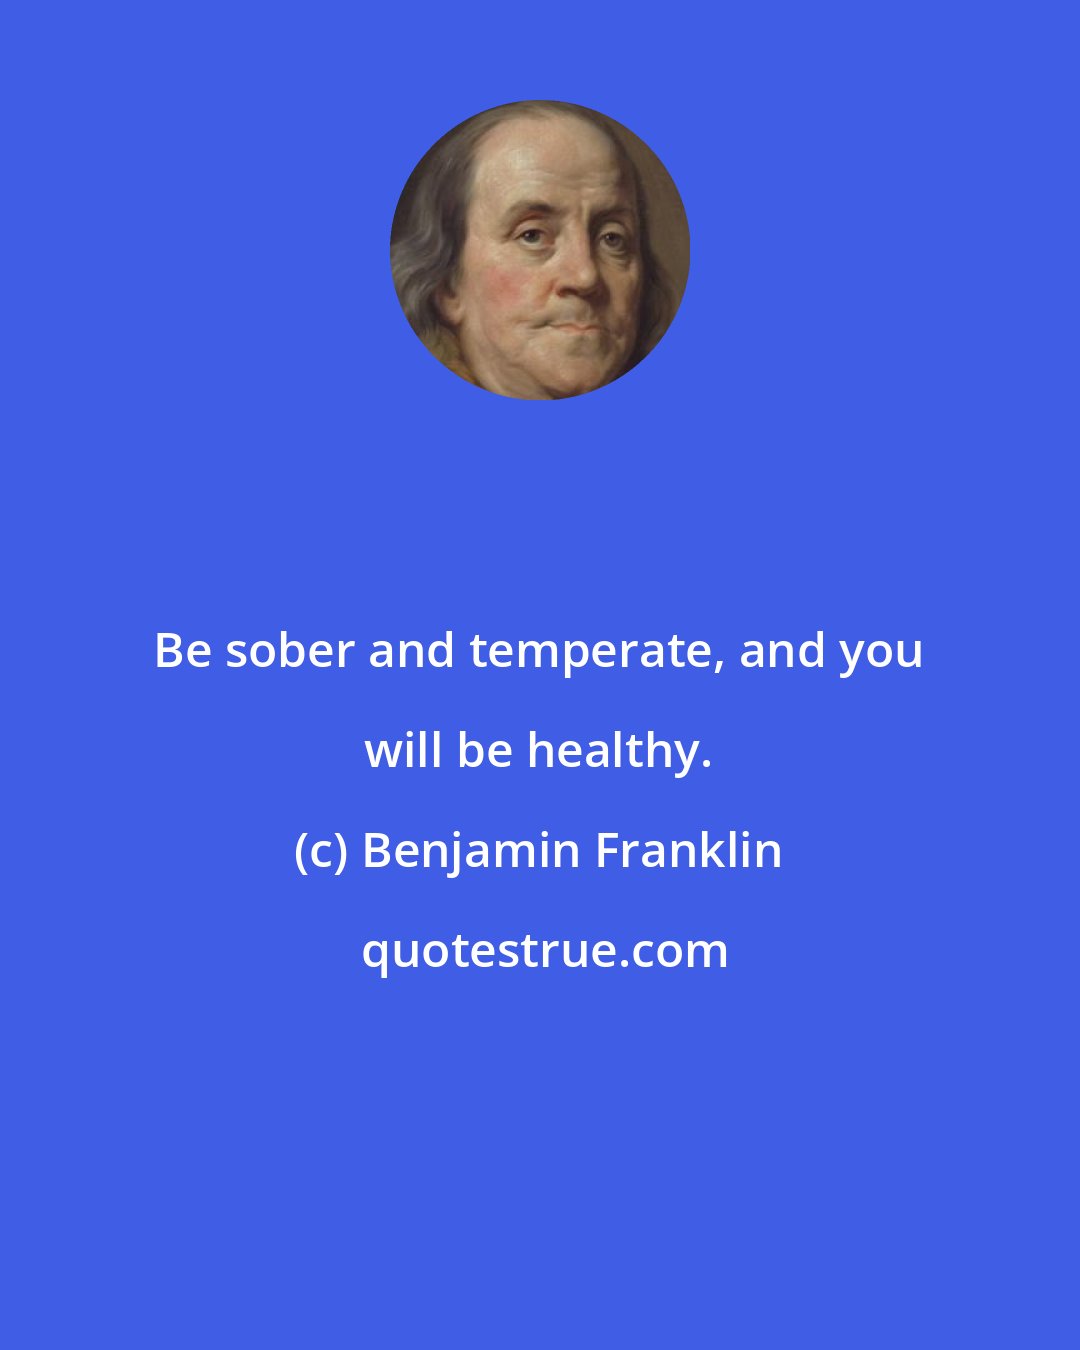 Benjamin Franklin: Be sober and temperate, and you will be healthy.